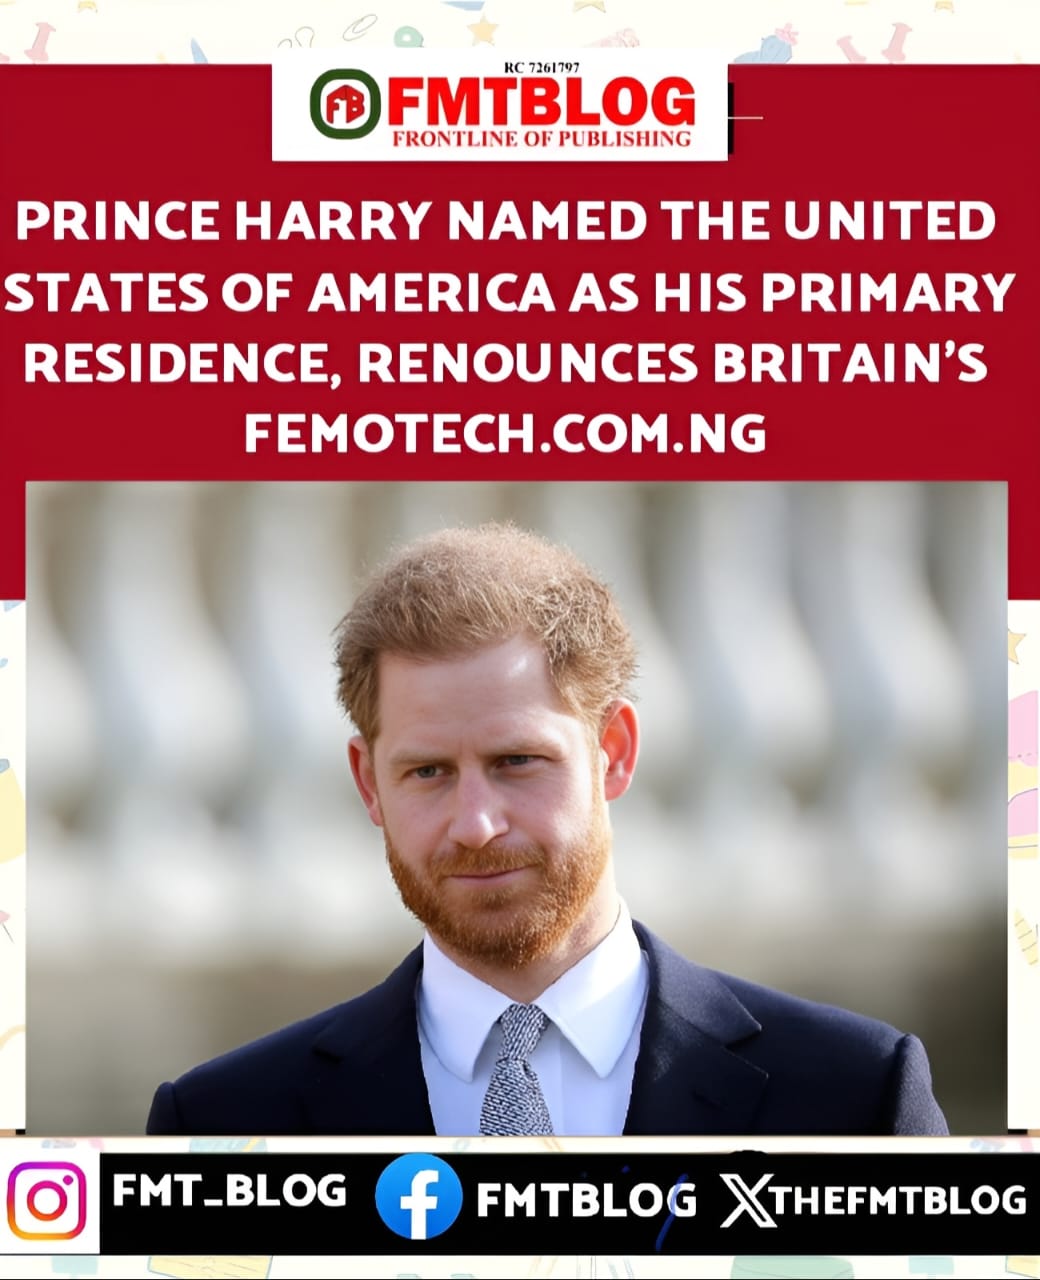 Prince Harry Named The United States Of America As His Primary Residence, Renounces Britain’s